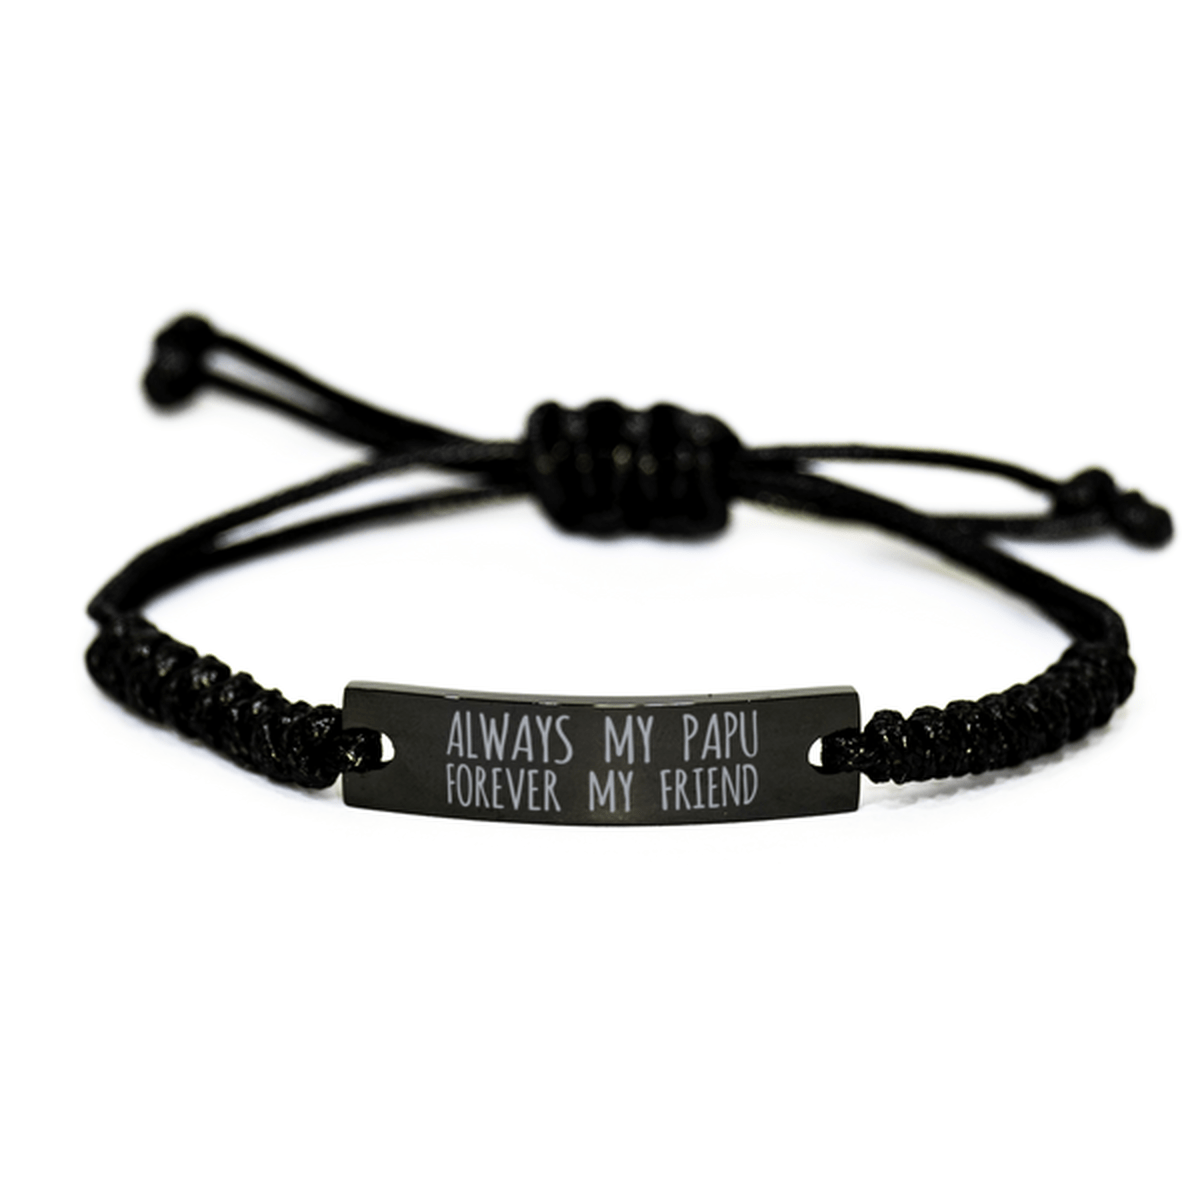 Inspirational Papu Black Rope Bracelet, Always My Papu Forever My Friend, Best Birthday Gifts For Family